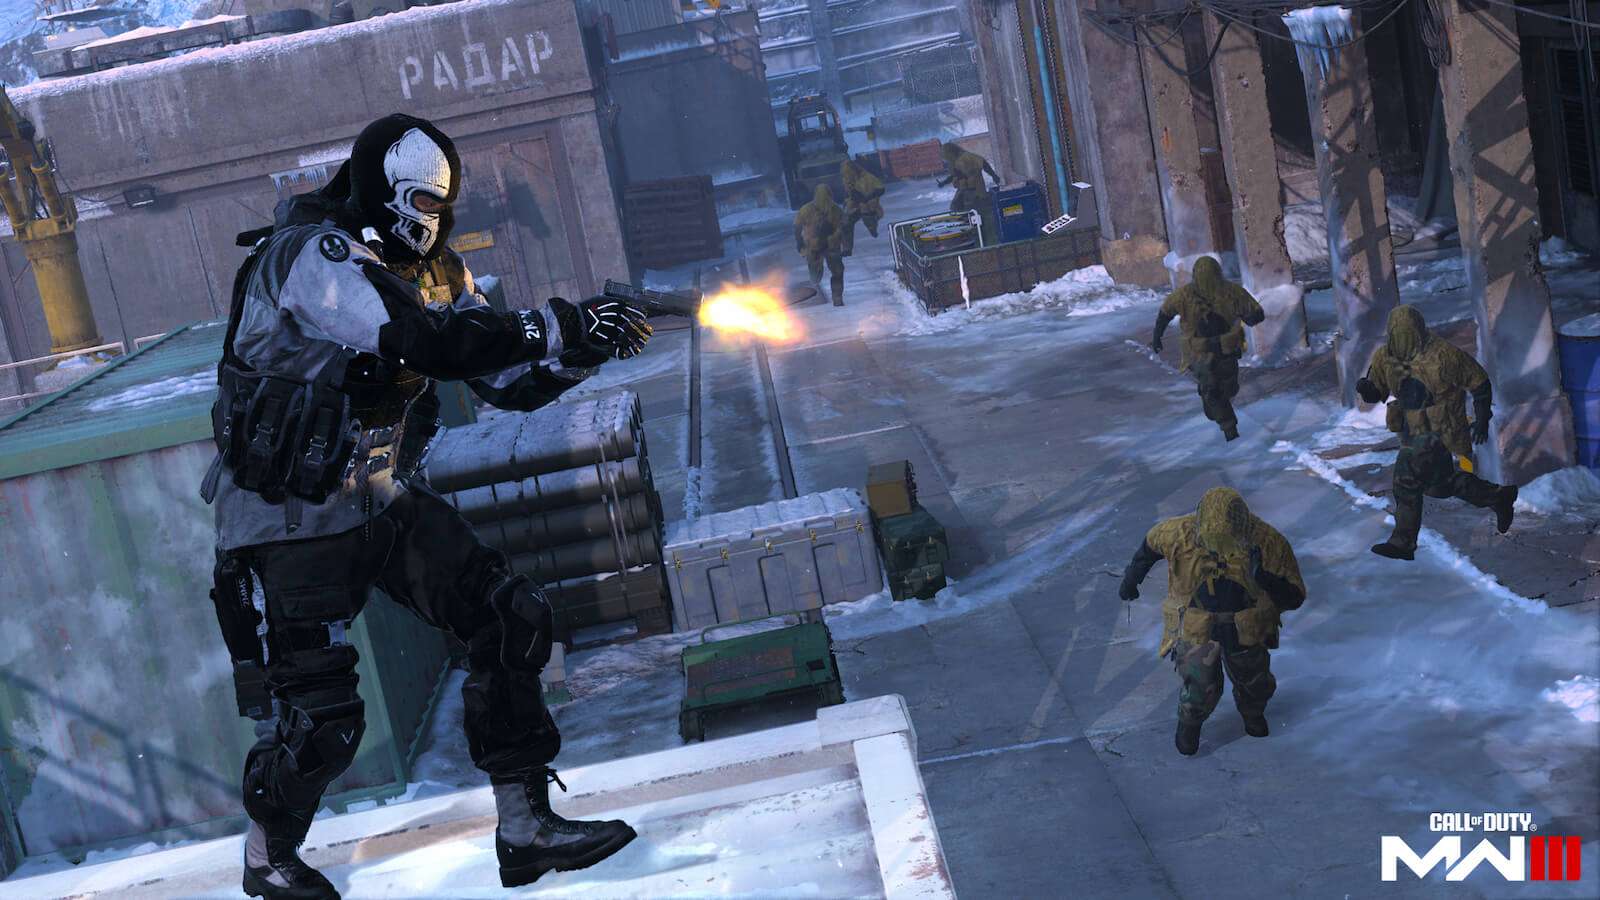 MW3 players divided over major Knife nerf in Ranked Play